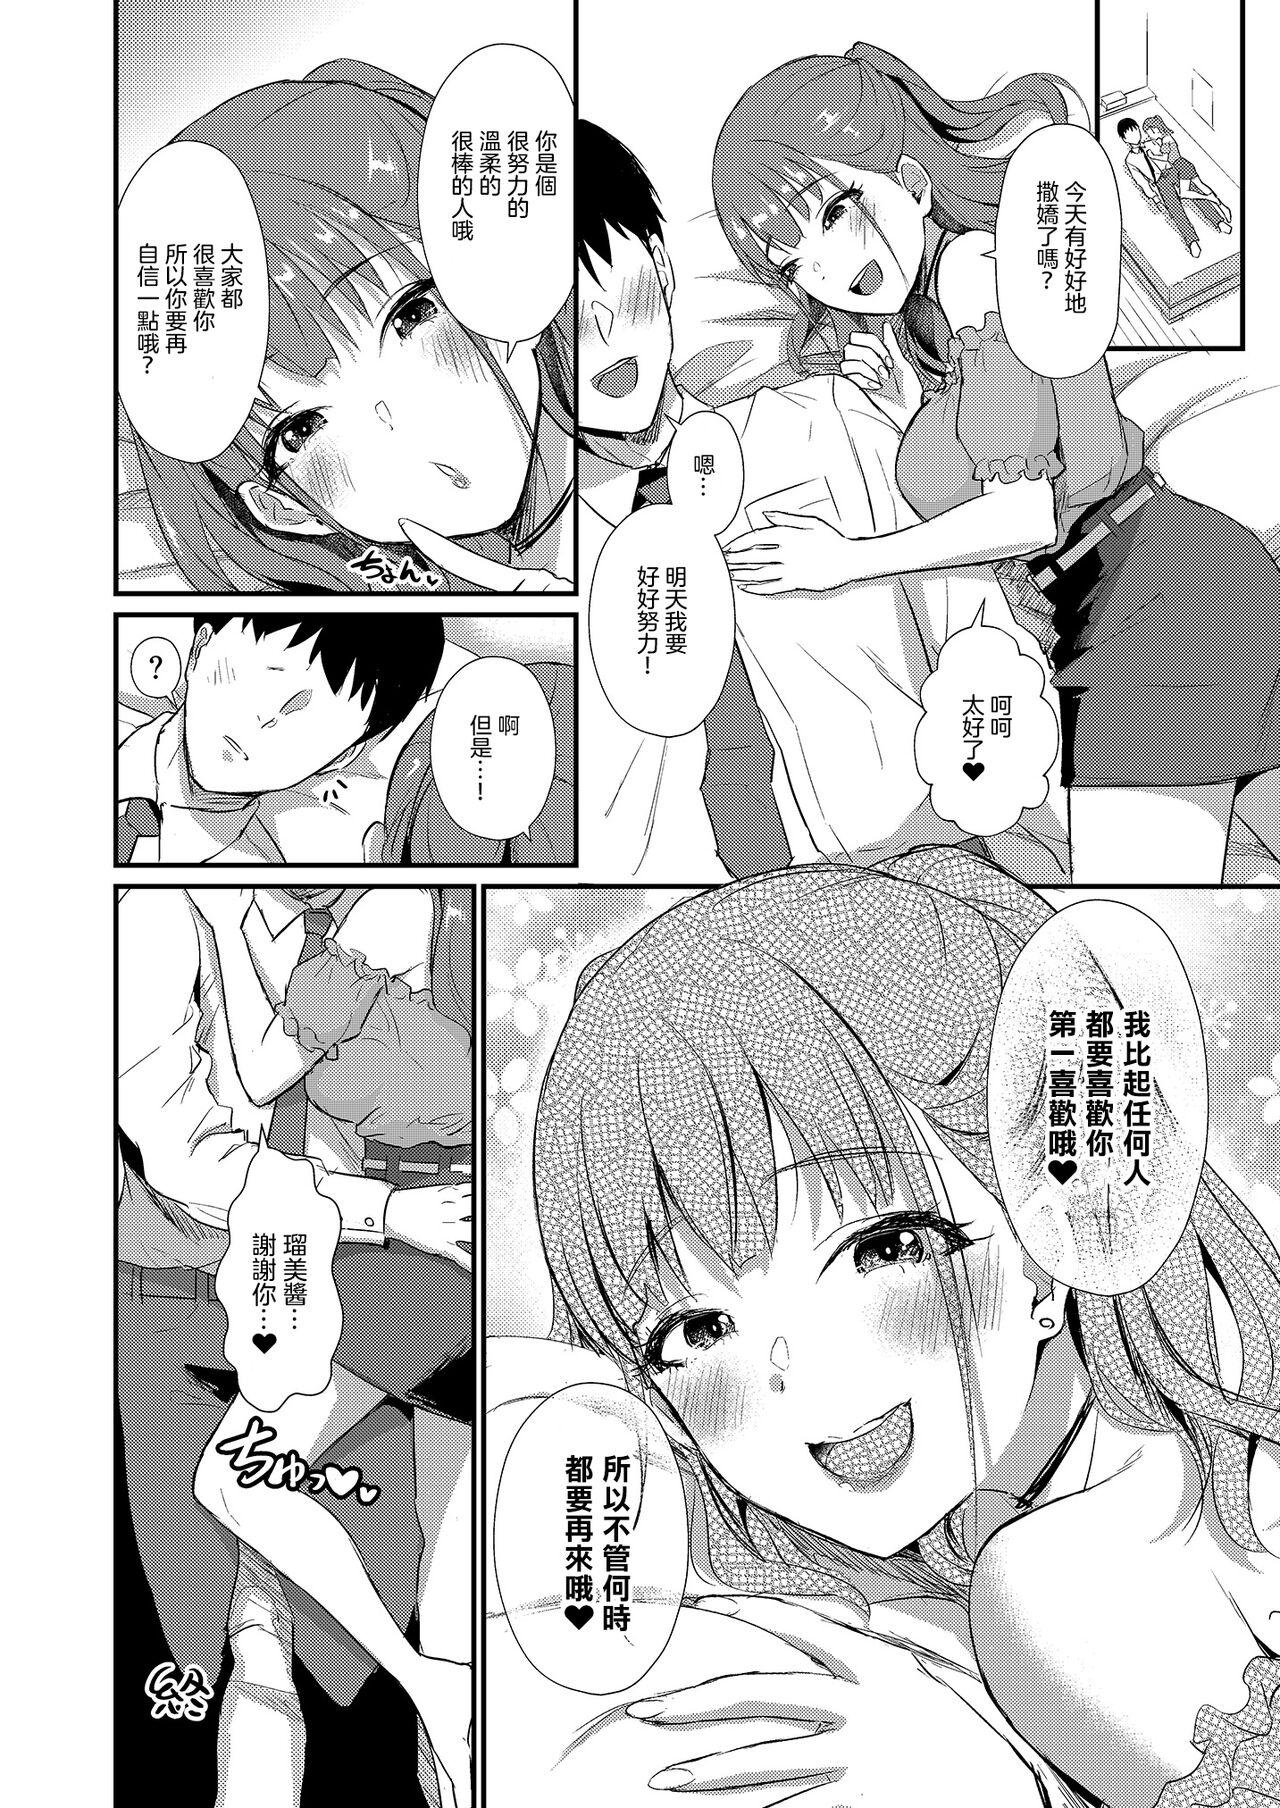 Fuck For Money Homehome Home e Youkoso! - Welcome to Home Home Home! | 歡迎來到誇誇屋！ Gagging - Page 15